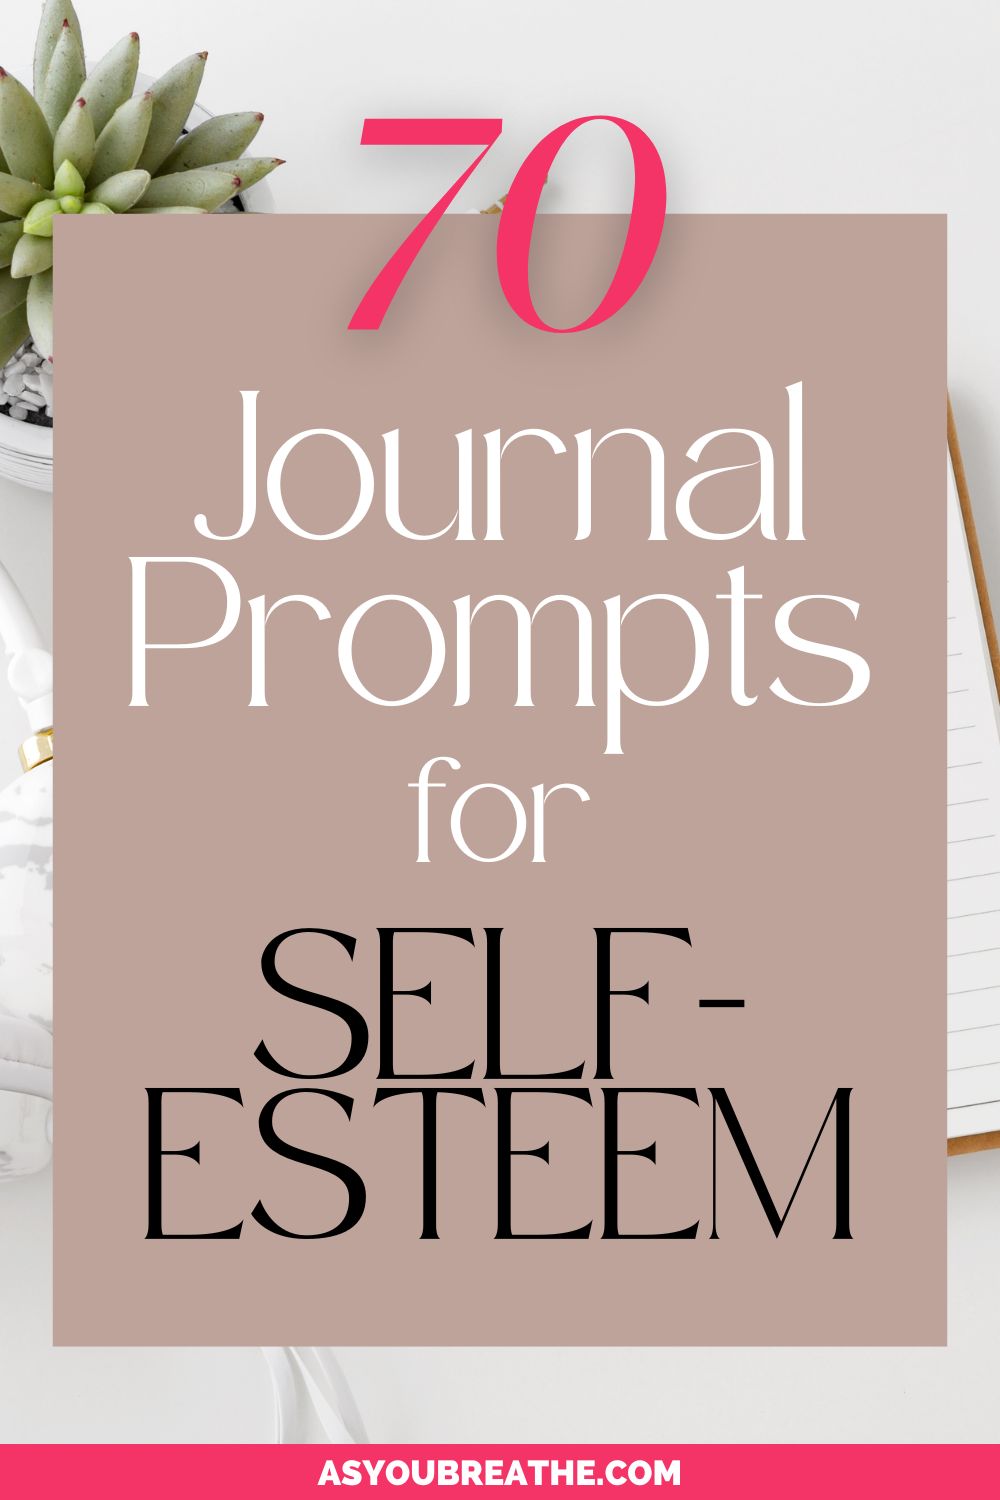 70 Self-Esteem Journal Prompts: Your Way to Confidence